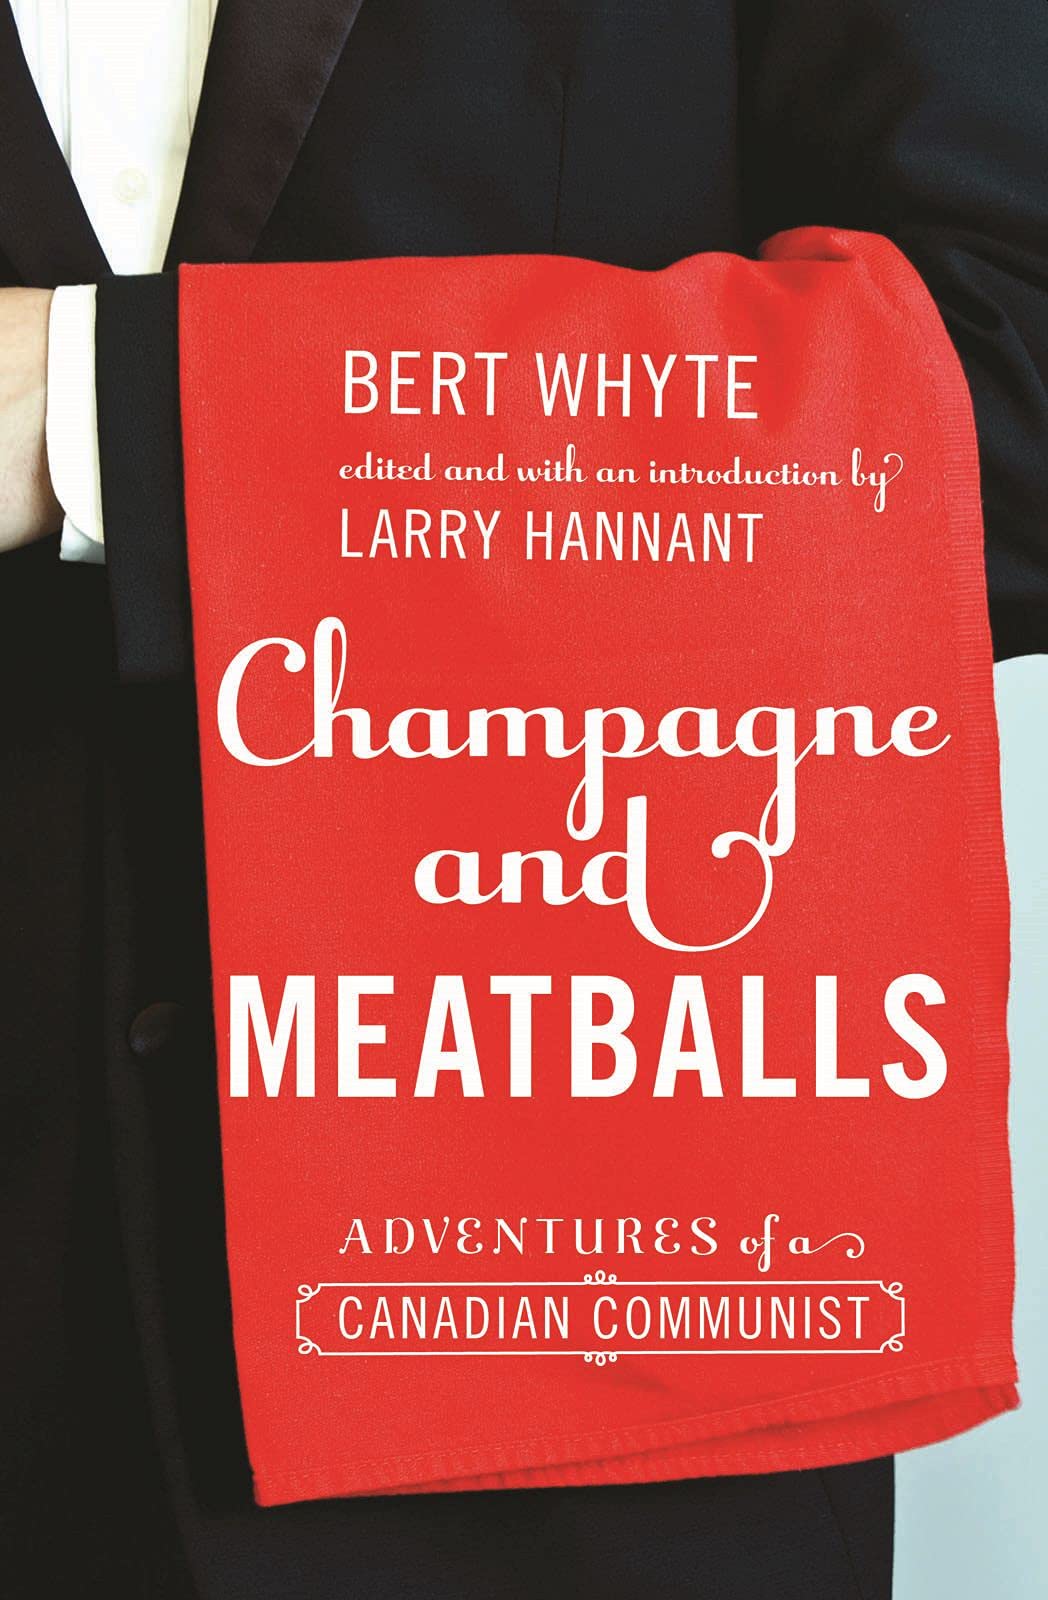 asset-tracker/Champagne-and-Meatballs.jpg